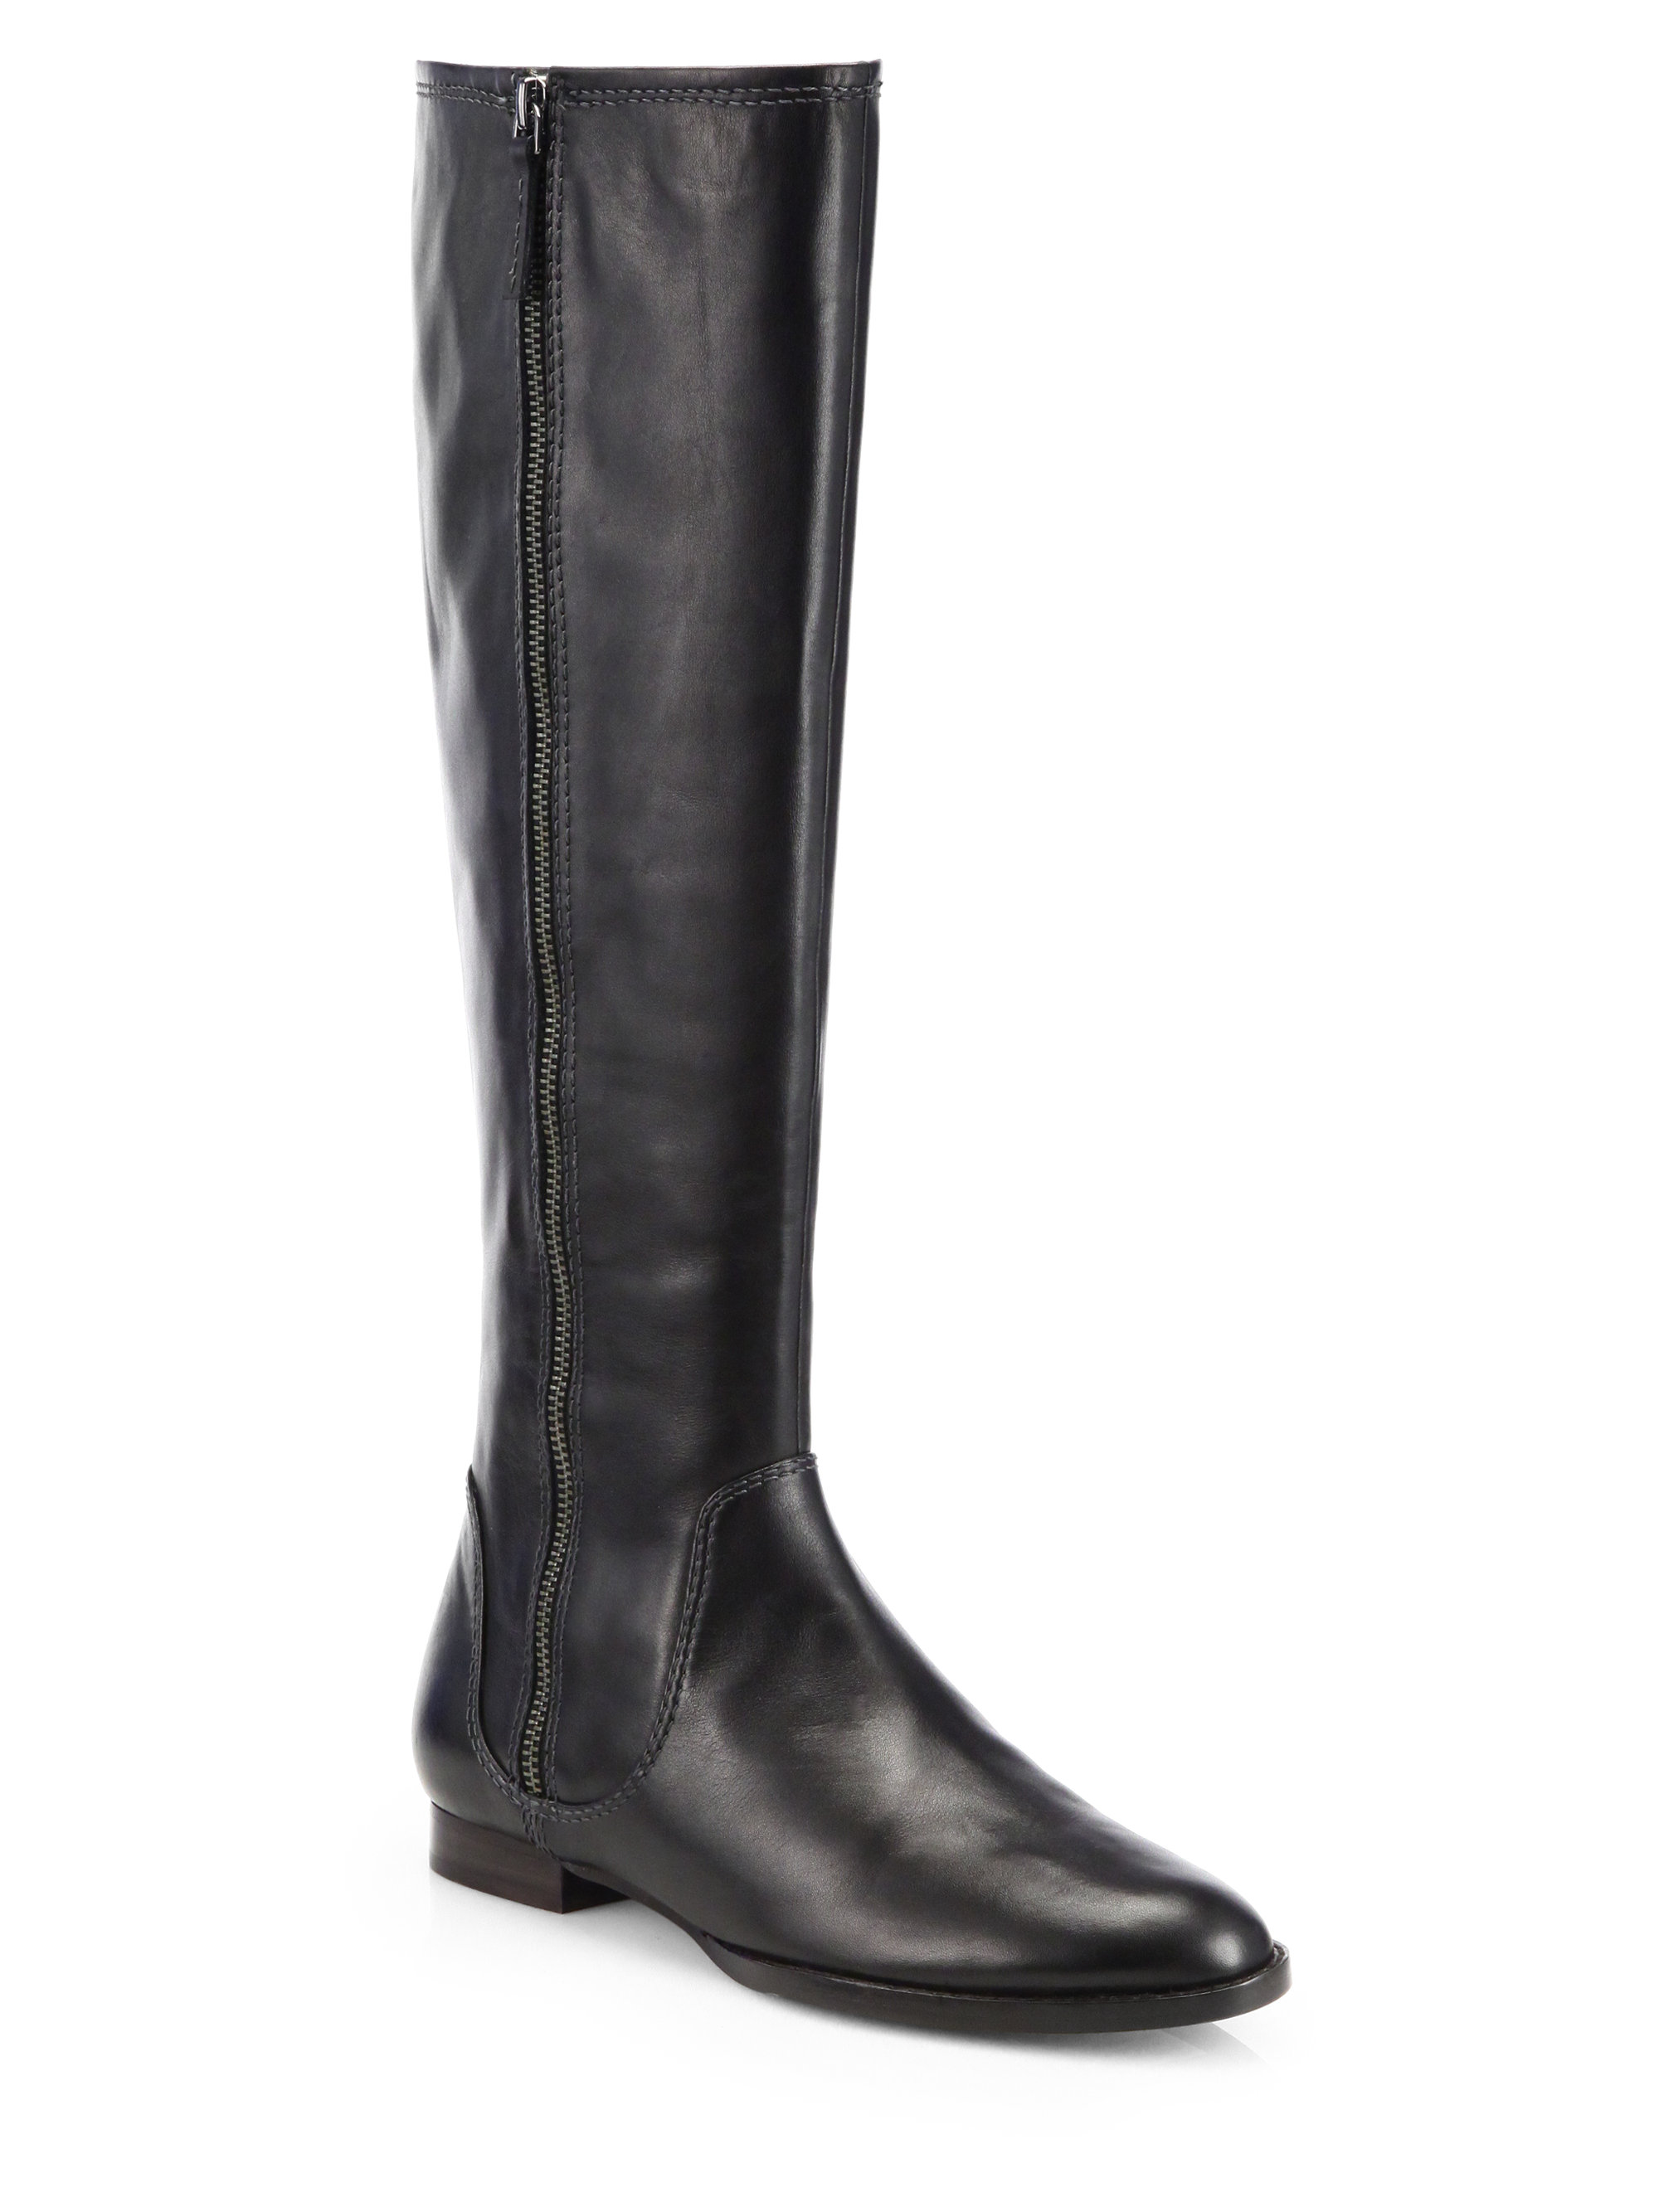 Elie Tahari Rover Leather Riding Boot